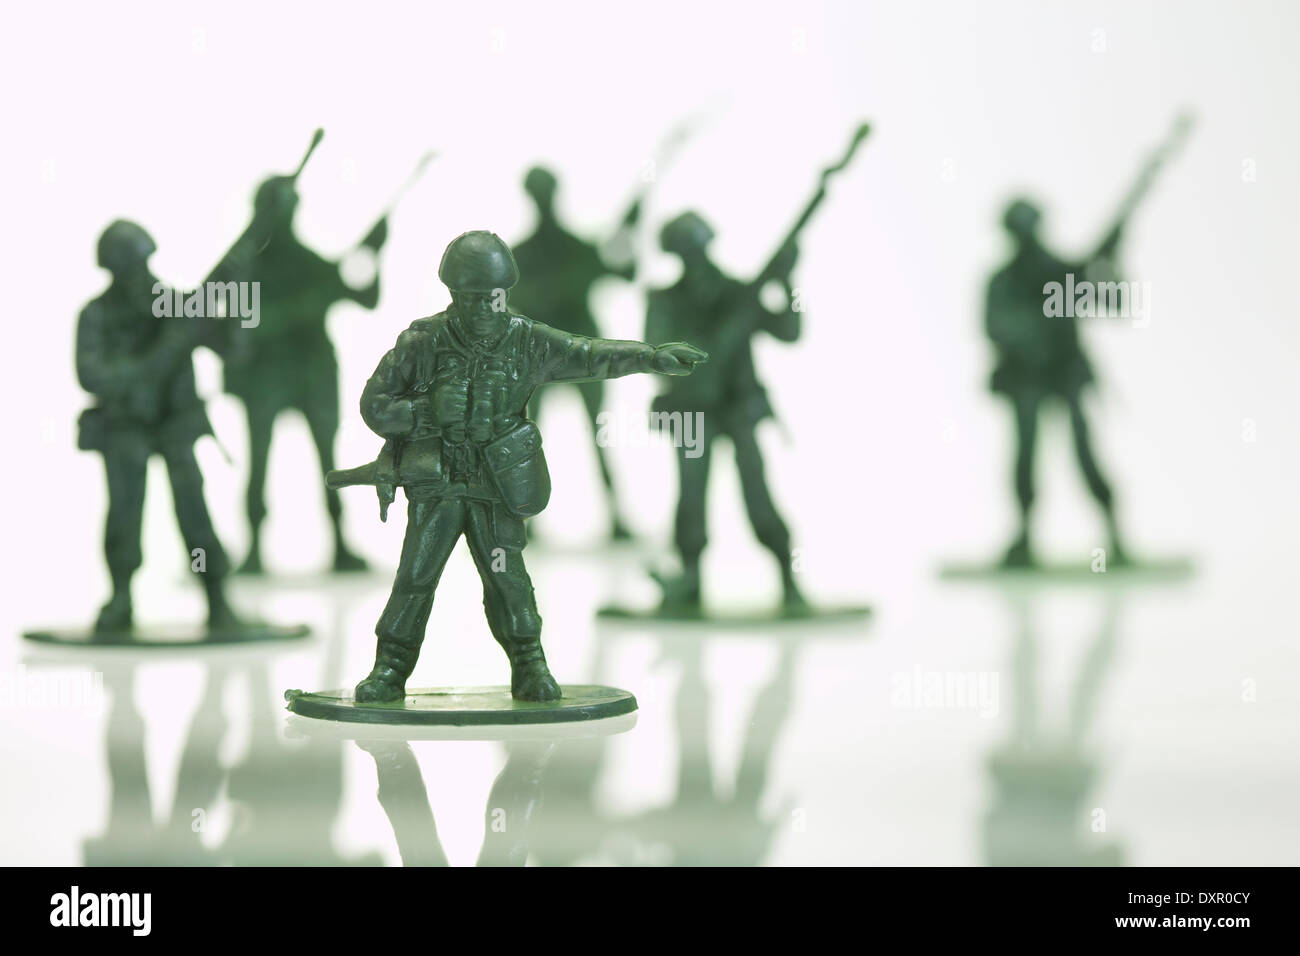 Plastic Toy Soldiers Stock Photo